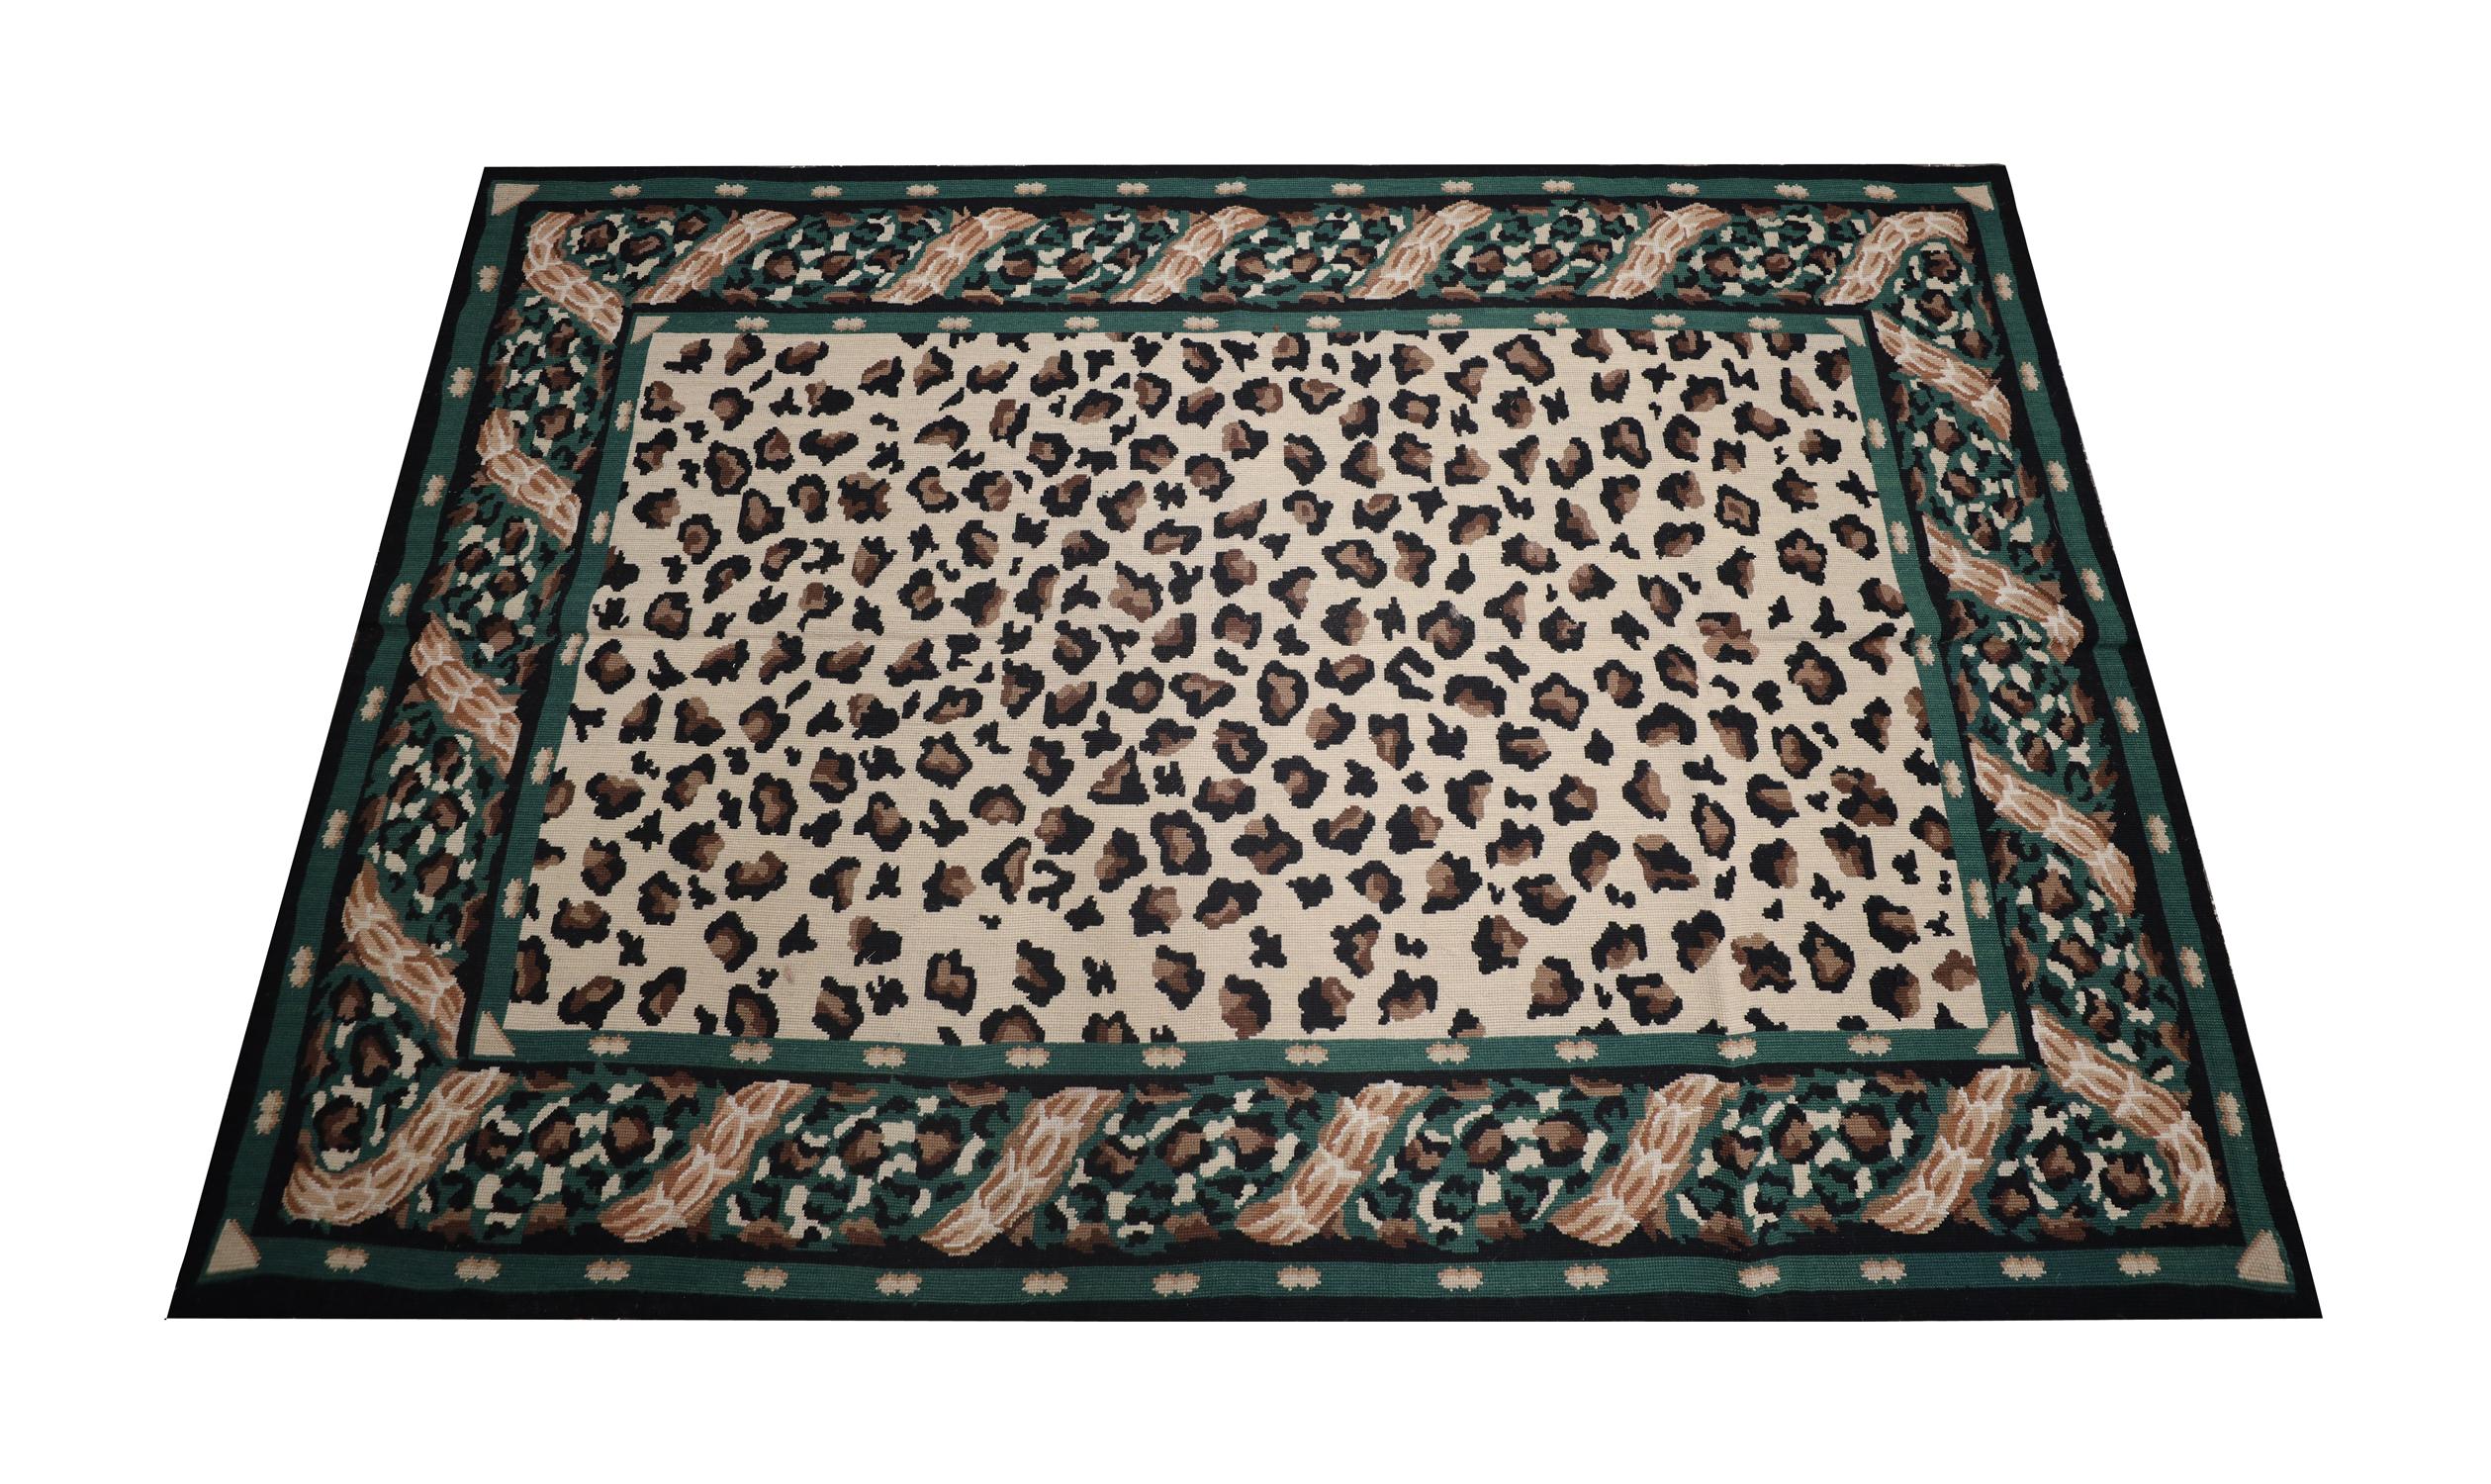 This modern style needlepoint rug has been woven with a contemporary colour palette of green, brown and beige that make up the unique leopard print design. Woven by hand with Fine hand-spun wool and cotton, not only is it an accent accessory, it's